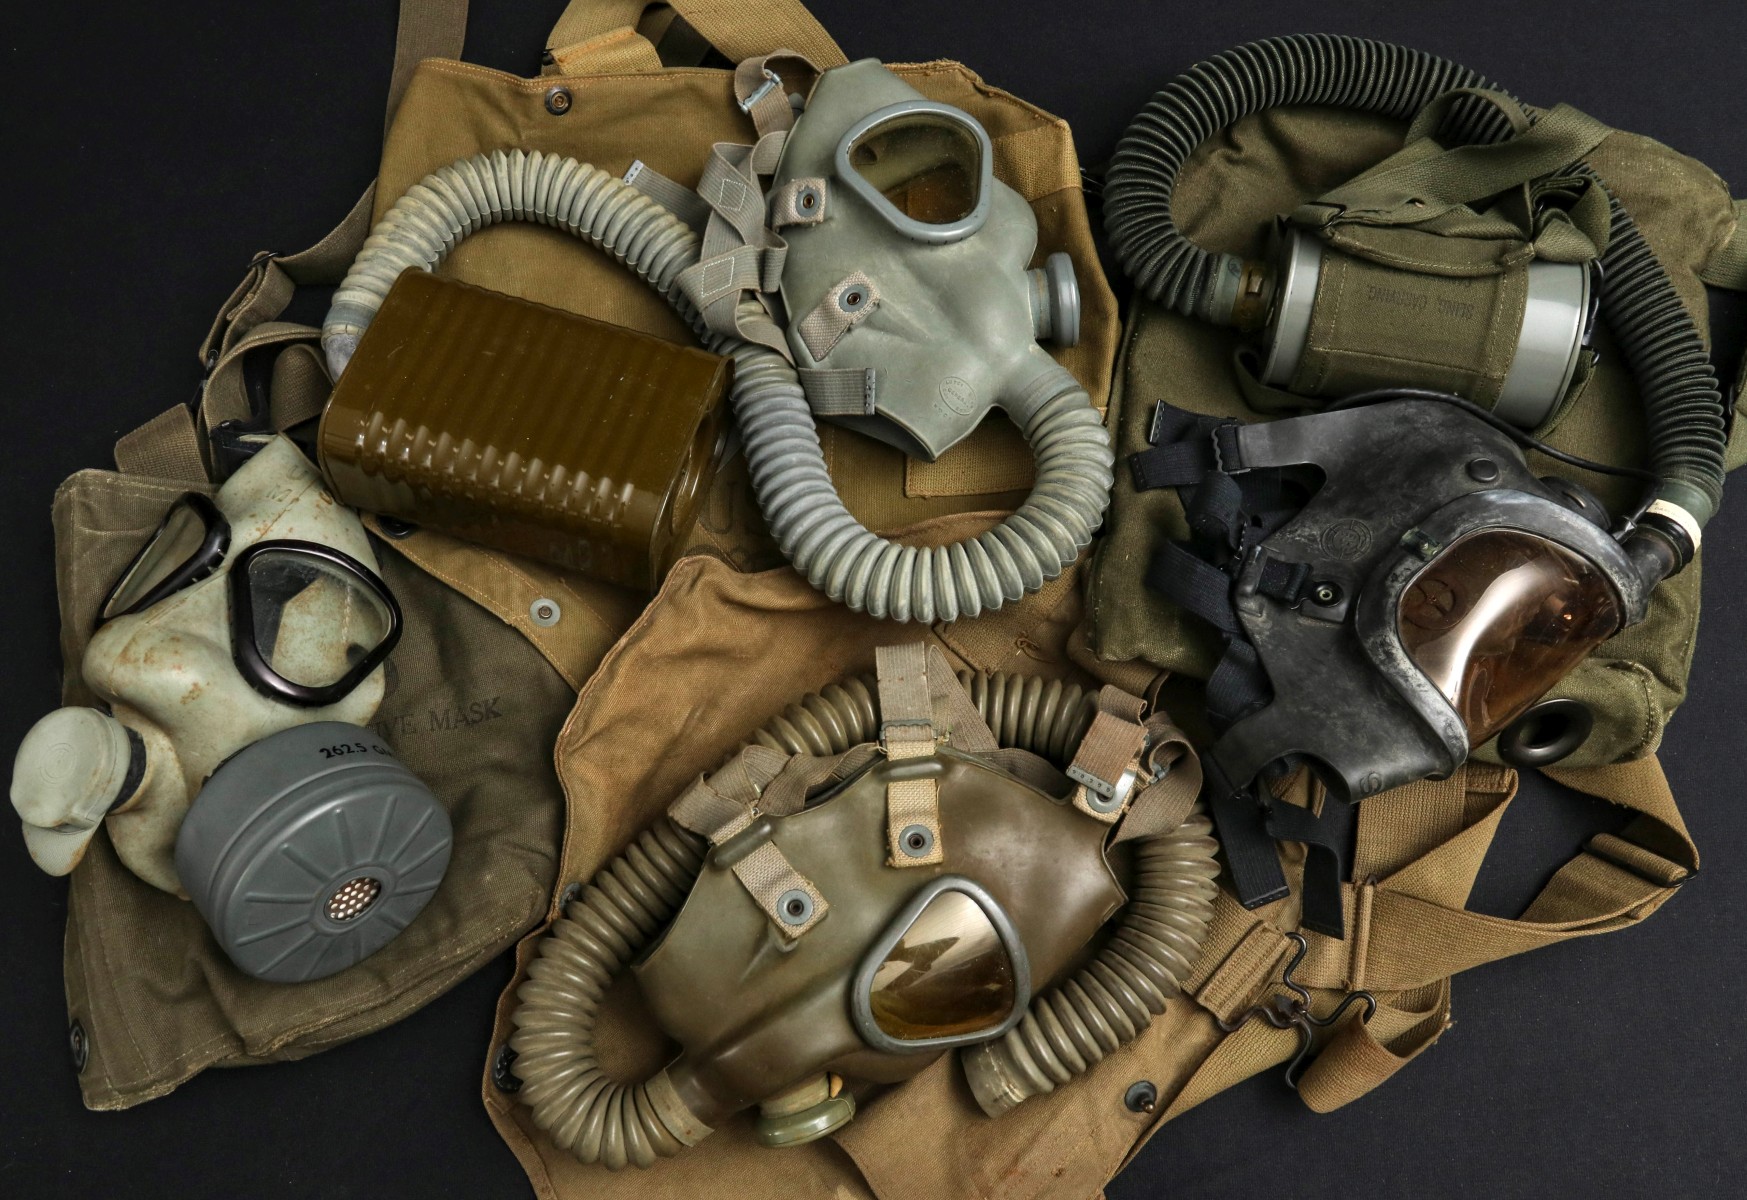 A COLLECTION OF VARIOUS US WWII GAS MASKS